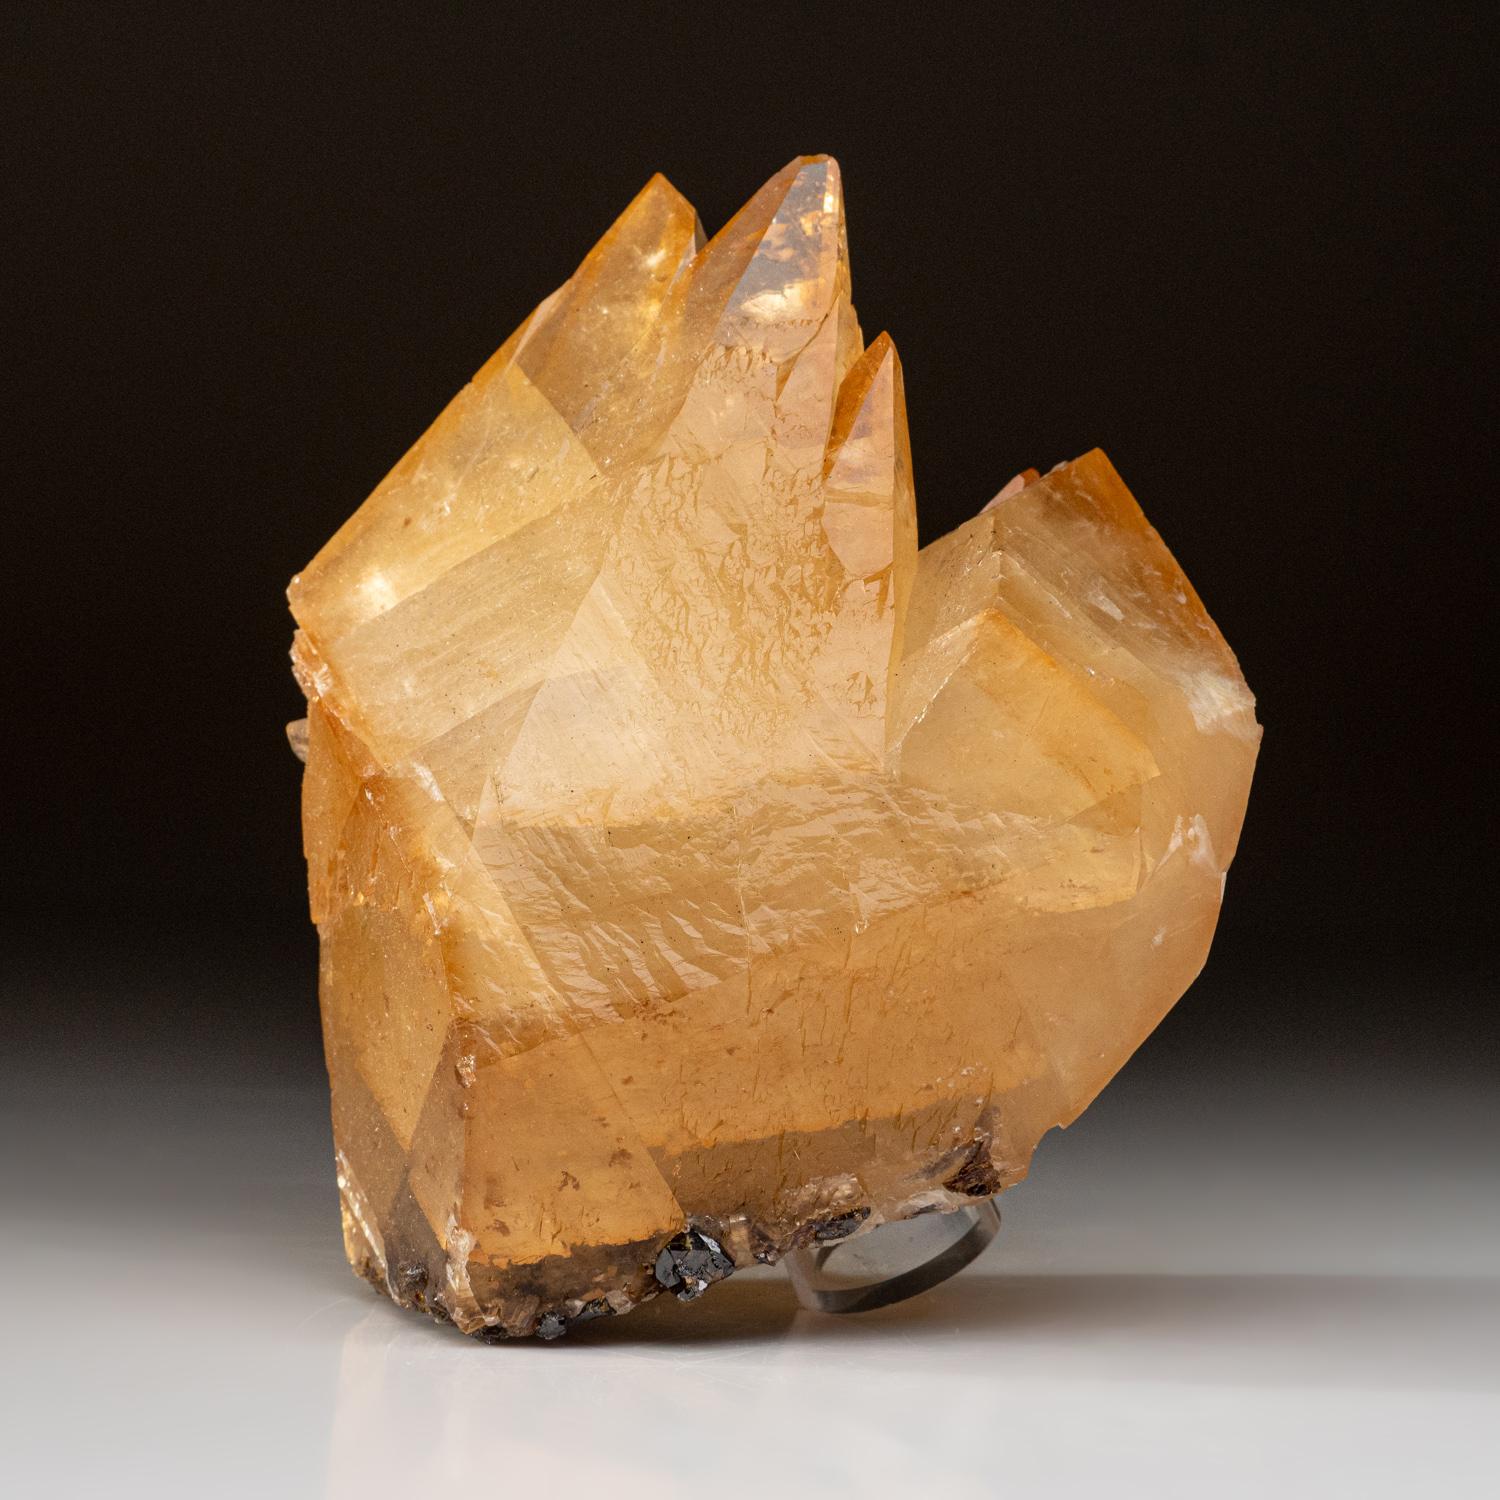 This specimen of golden calcite from Elmwood Mine, Carthage, Smith County, Tennessee is a stunning double-terminated scalenohedral twin with re-entrant faces and a small sphalerite crystal embedded in the back. Its lustrous, transparent look adds an